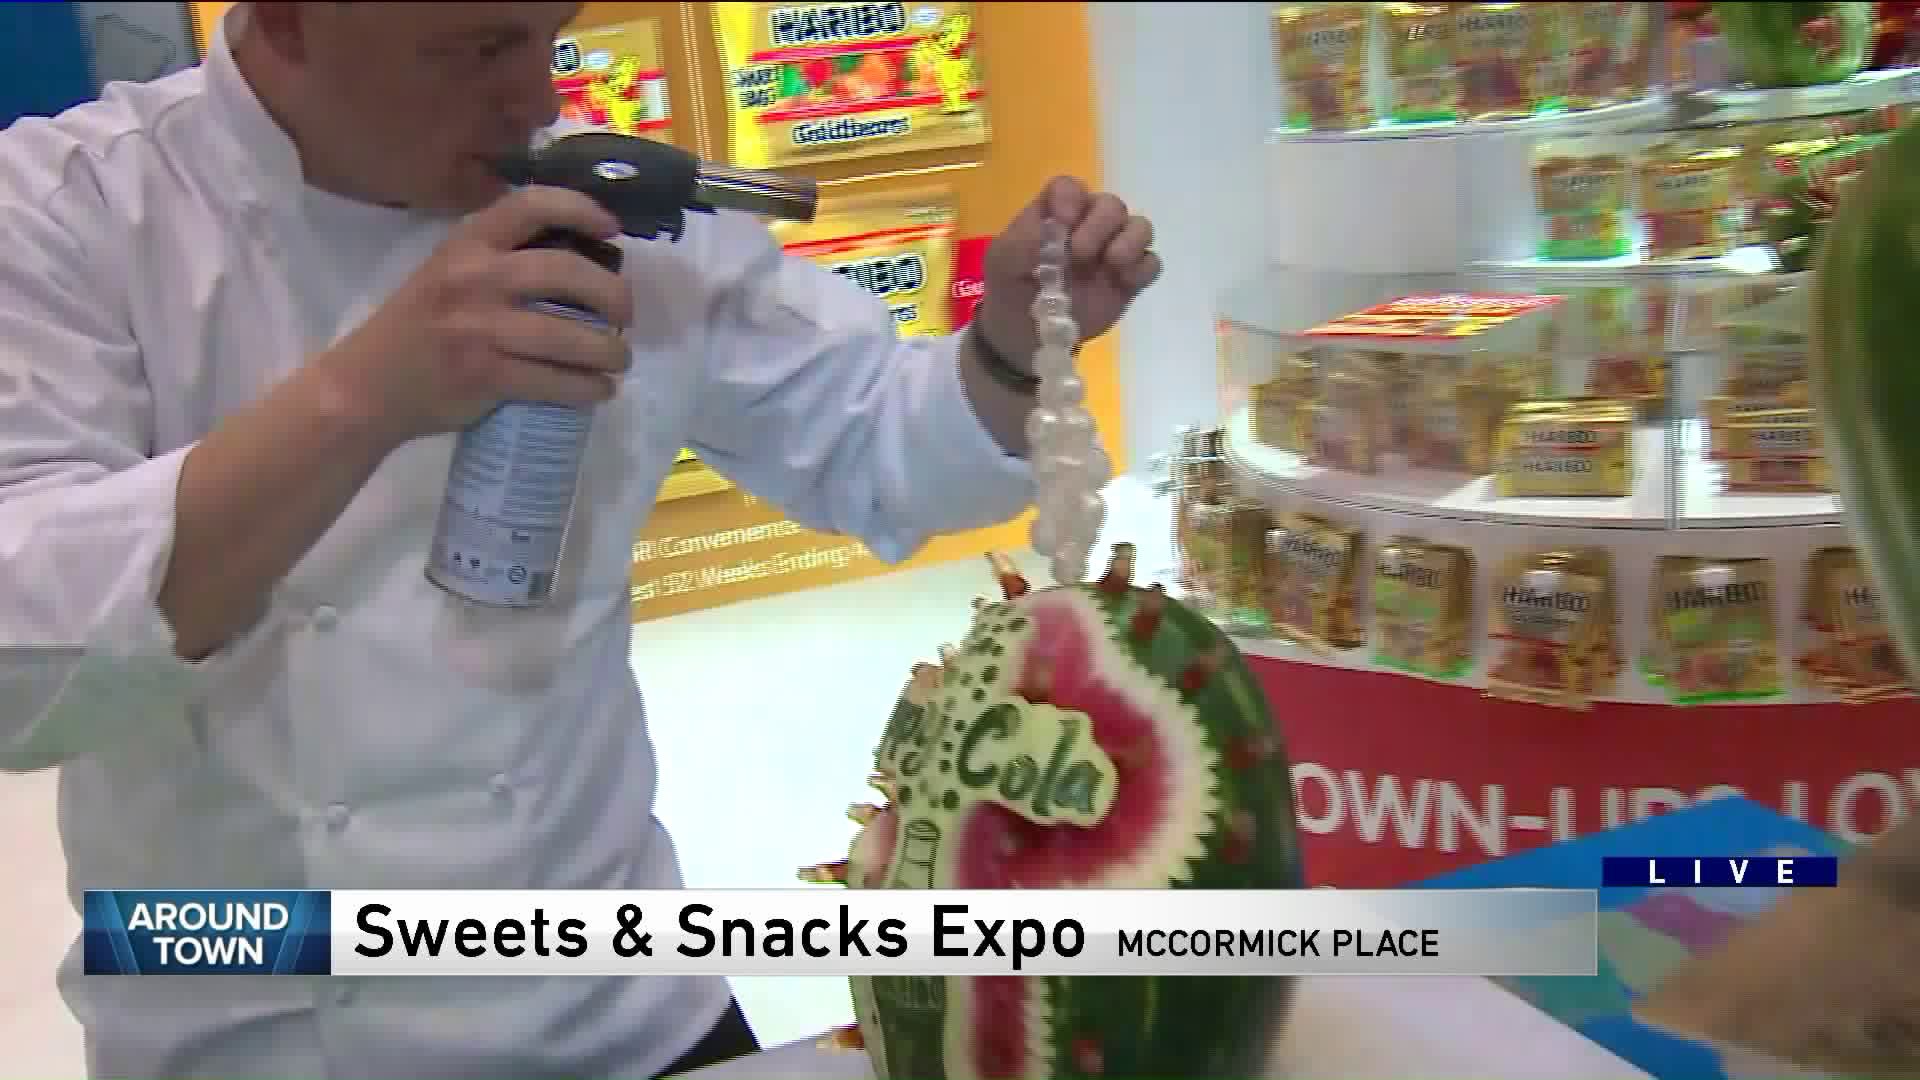 Around Town visits the Sweets & Snacks Expo